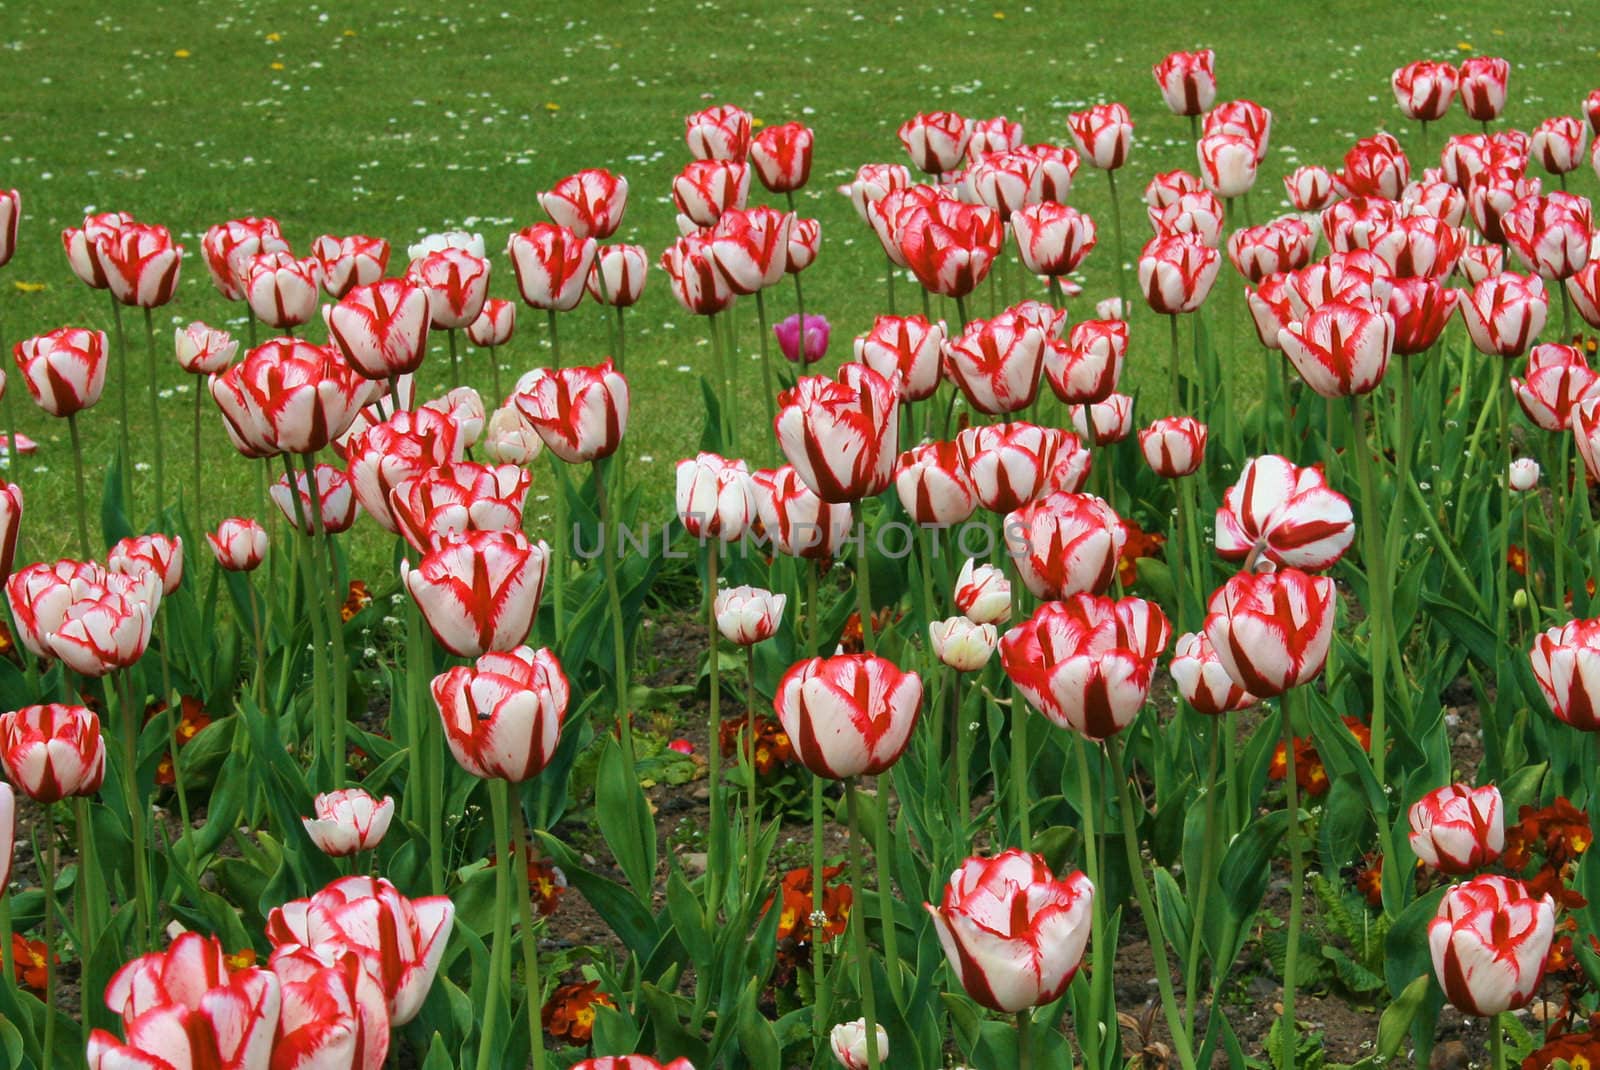 flower bed of red and white striped tulips